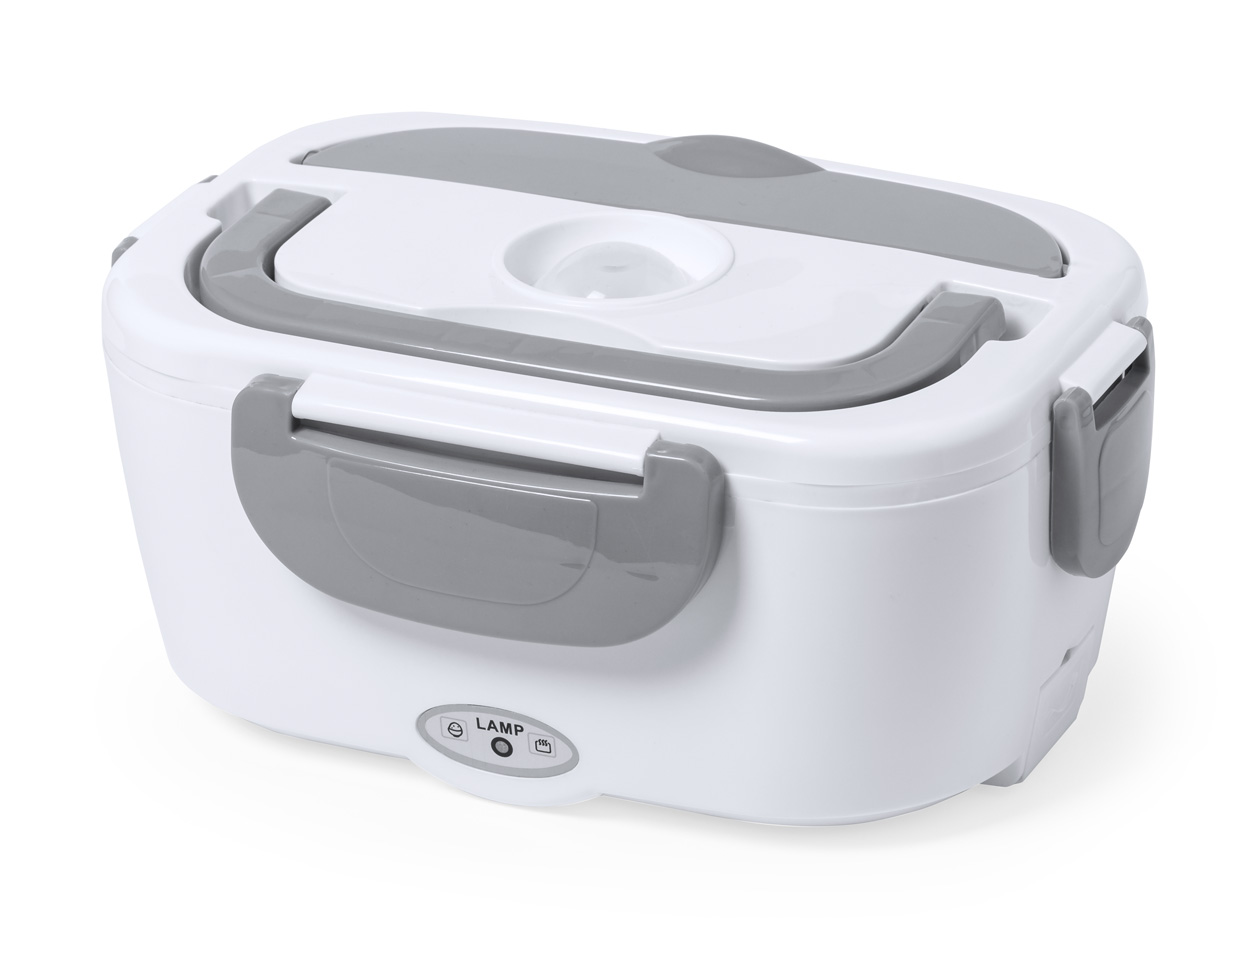 Promo  Calpy electric lunch box